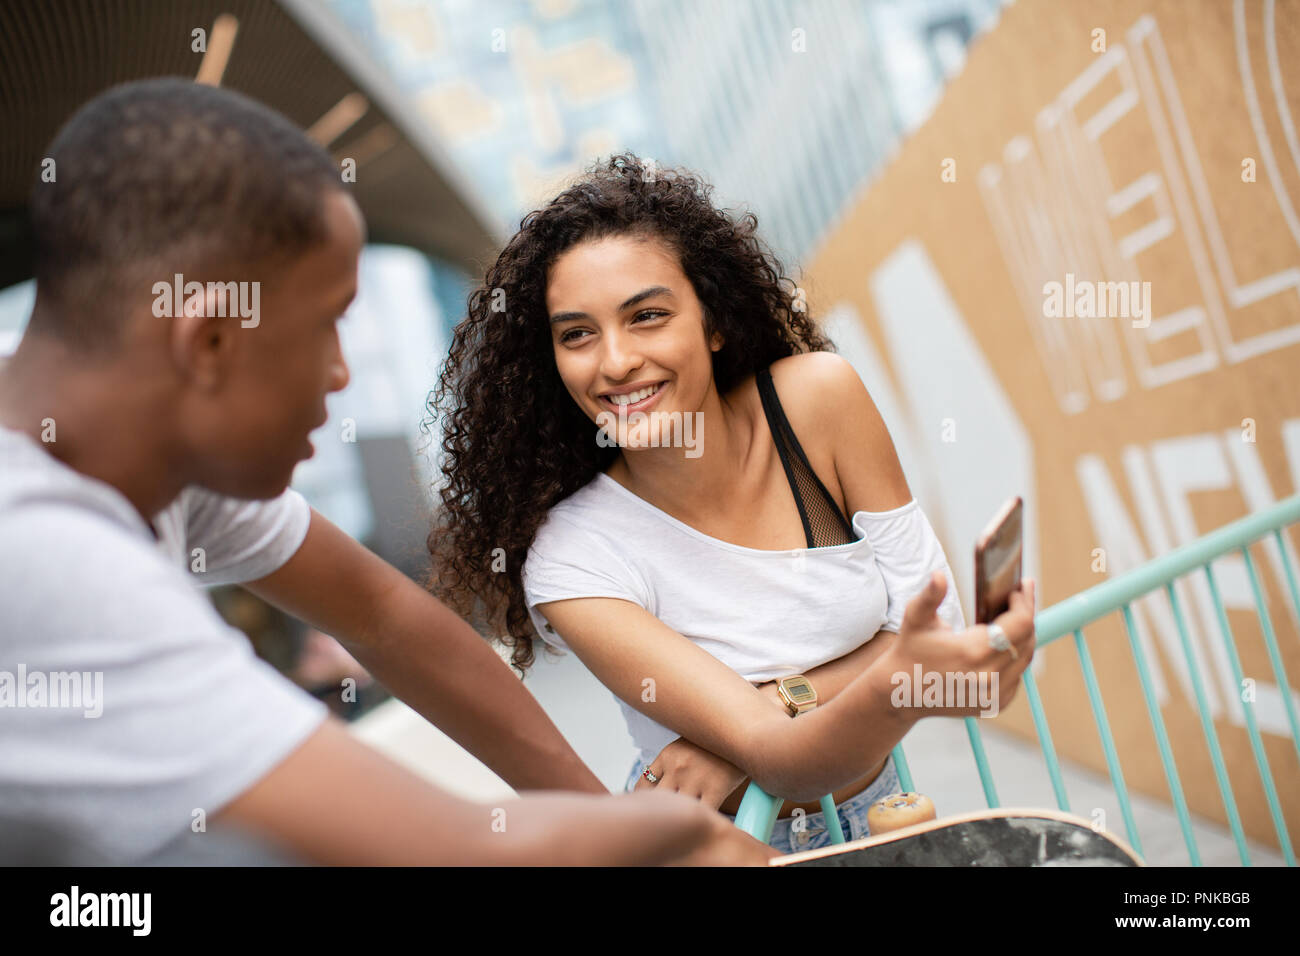 Teenagers socialising outdoors in city with smartphone Stock Photo